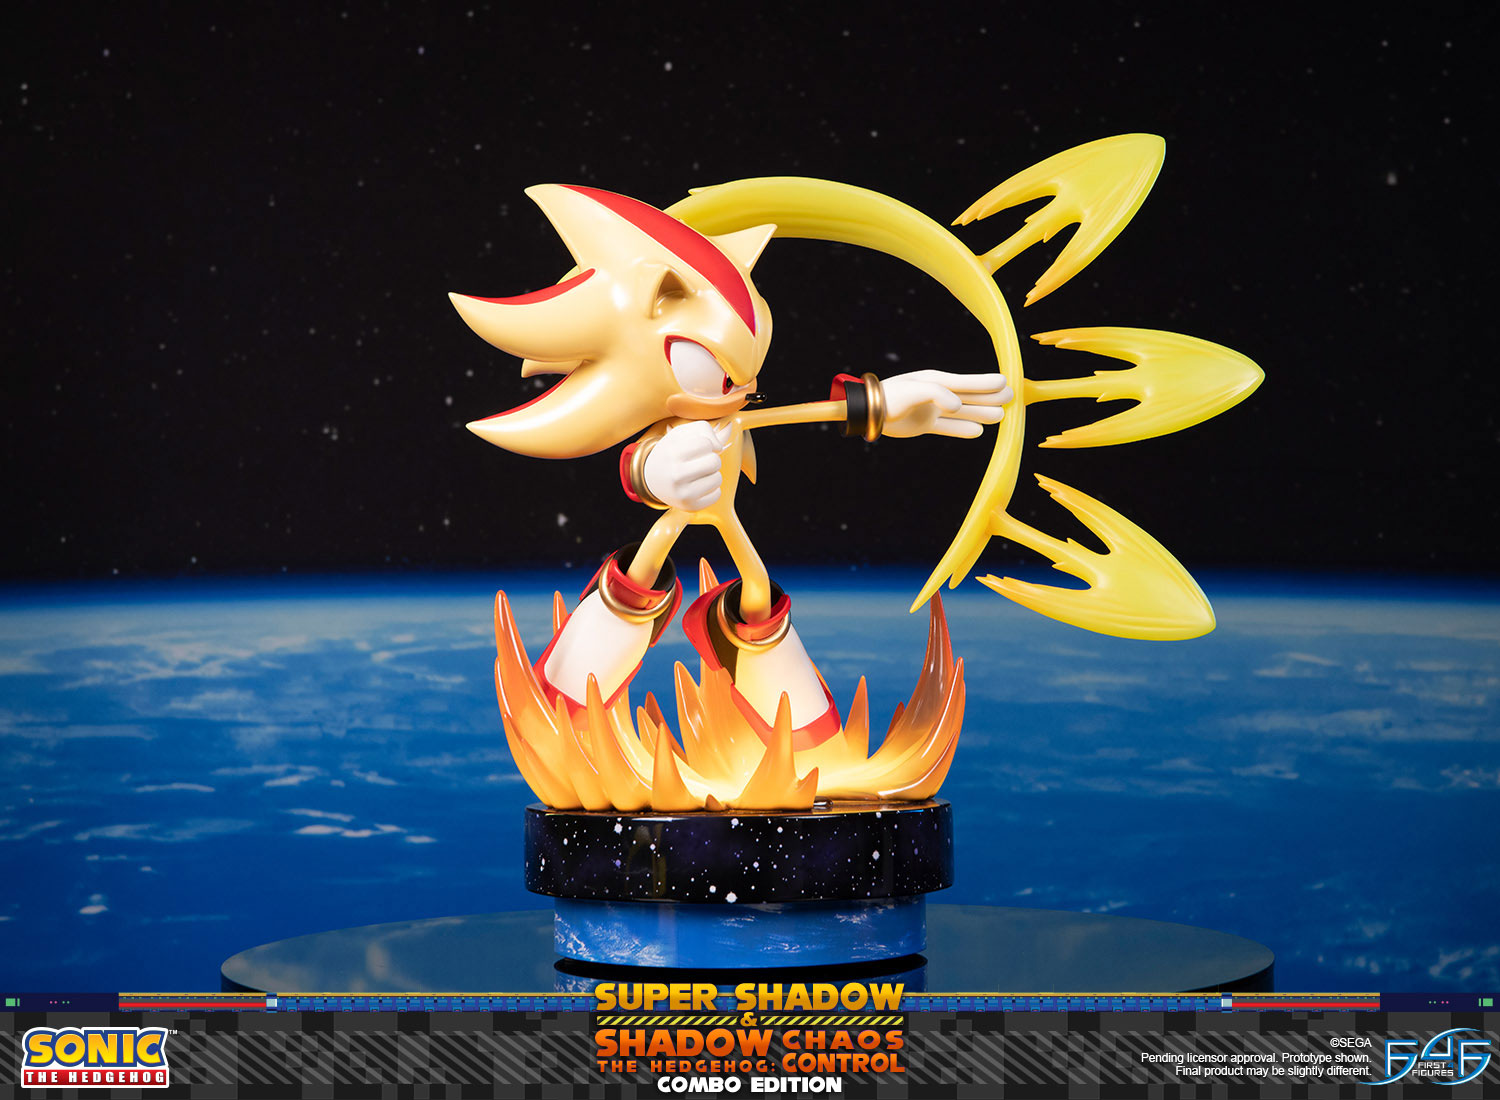 Super Shadow and Shadow the Hedgehog: Chaos Control (Combo Edition)